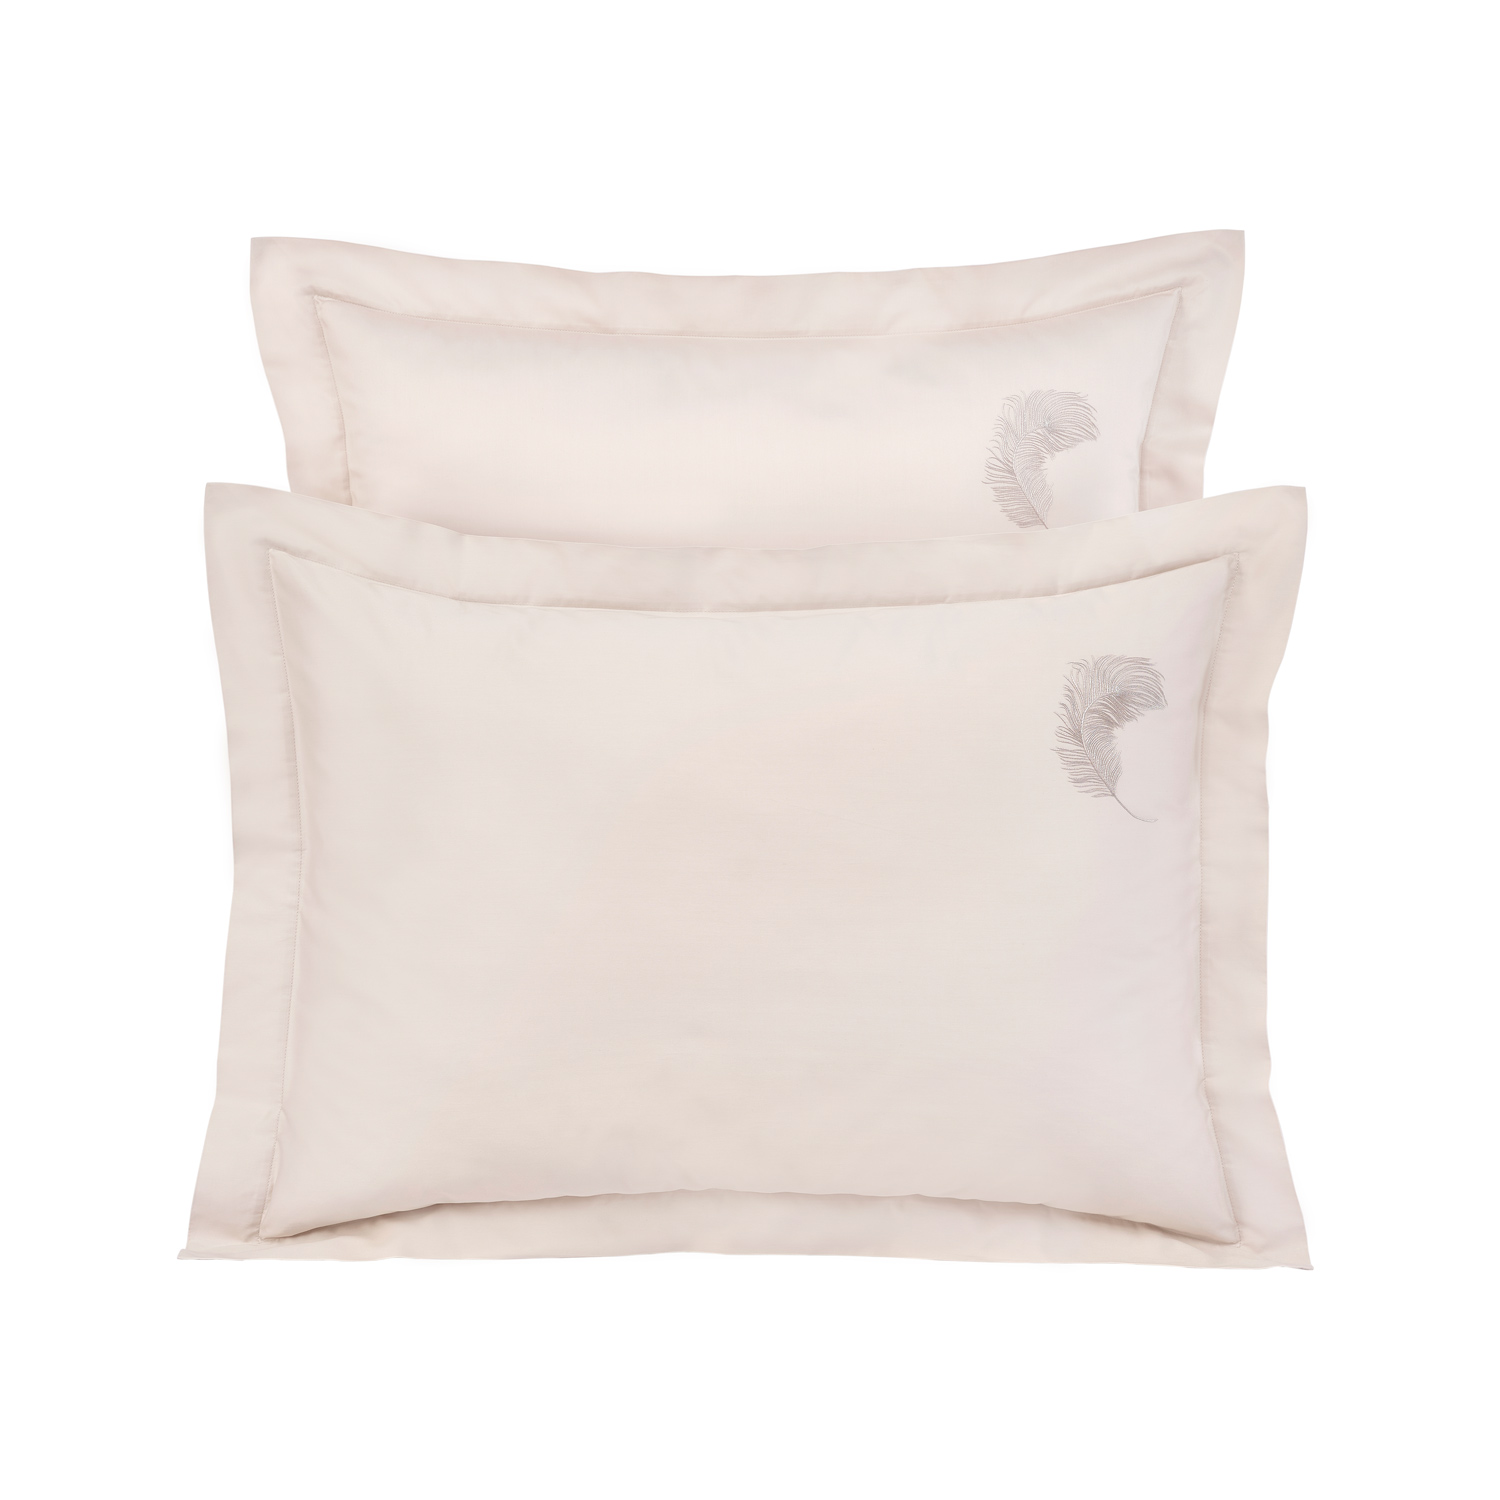 Feather Pair of Pillow Shams